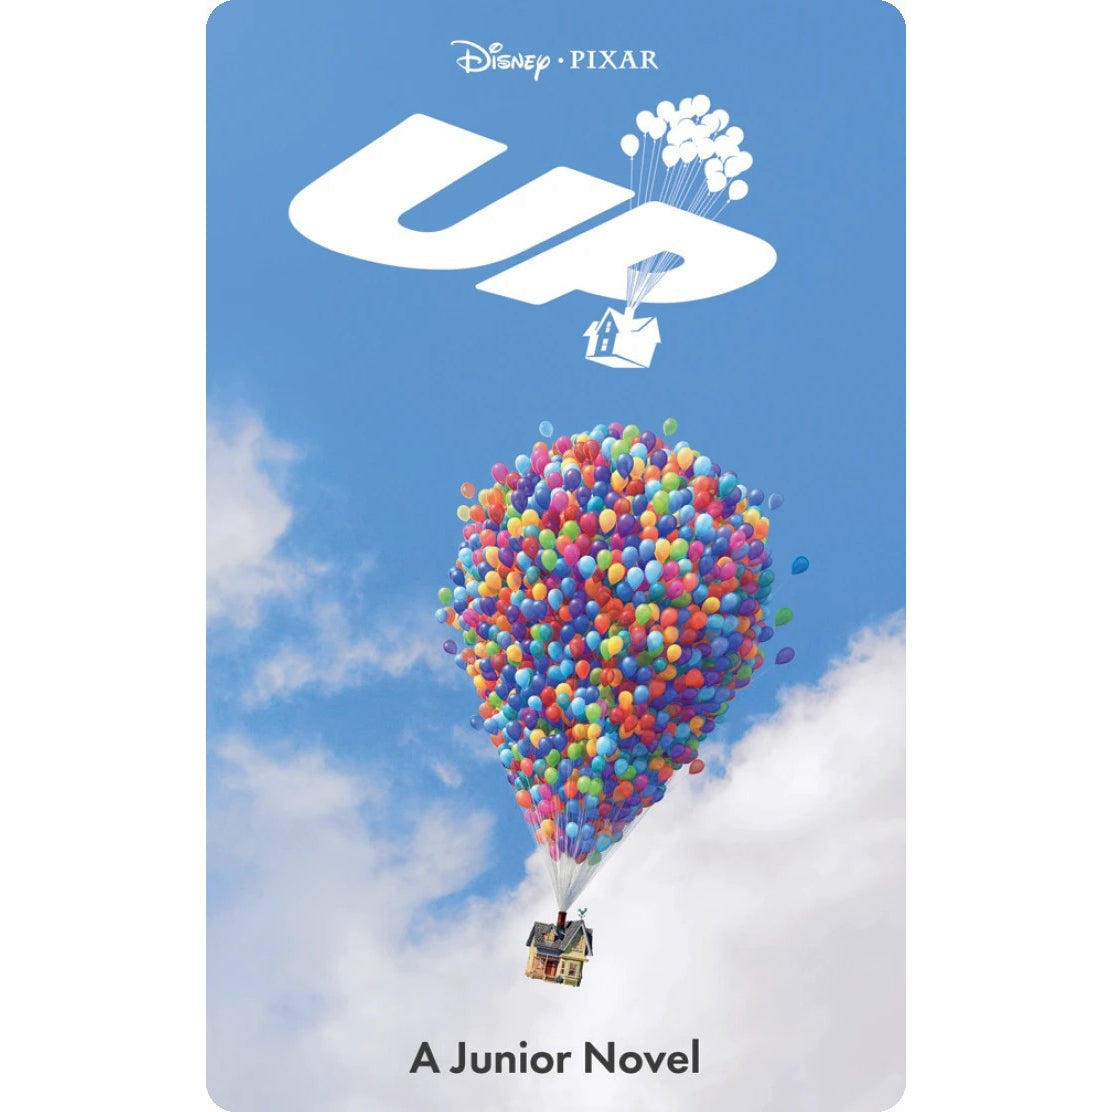 Yoto Card - Disney Pixar Up - Child Friendly Audio Story Card for the Yoto Player